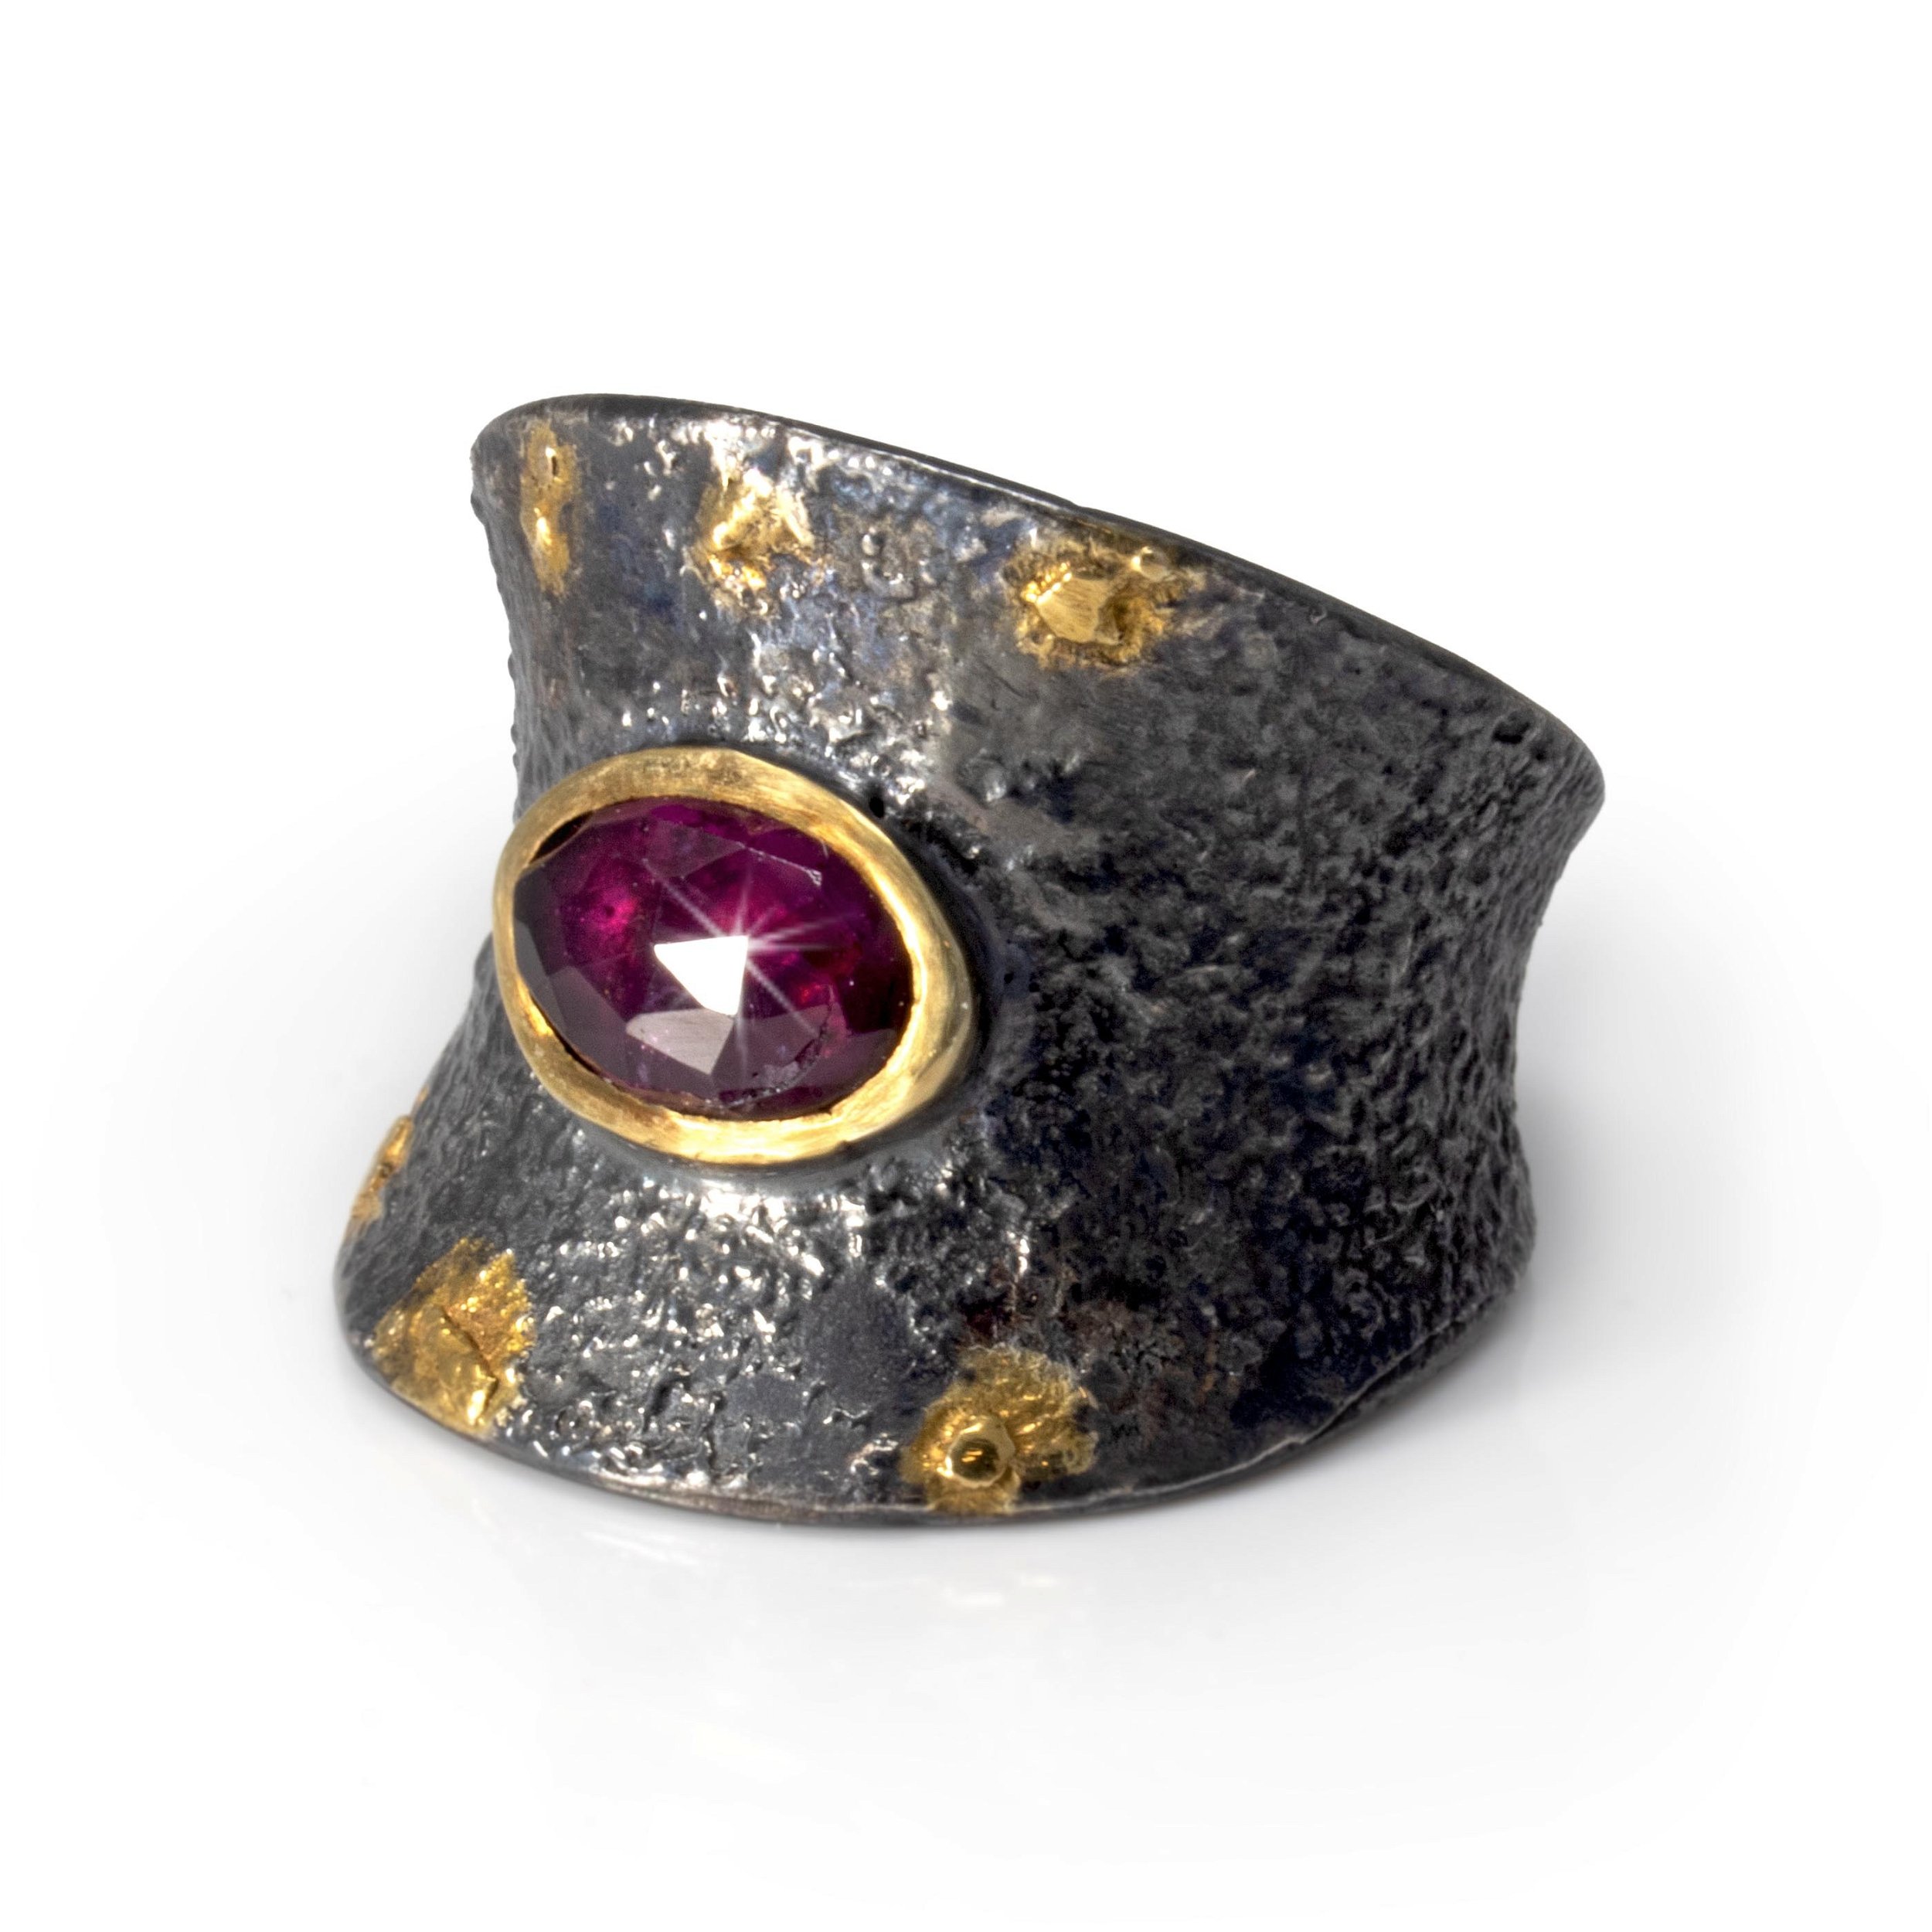 Faceted Pink Tourmaline Ring Size 7.5 - Oval With Gold Vermeil Bezel On Tapered & Contoured Stamped Oxidized Sterling Silver Band With Gold Leaf Accents